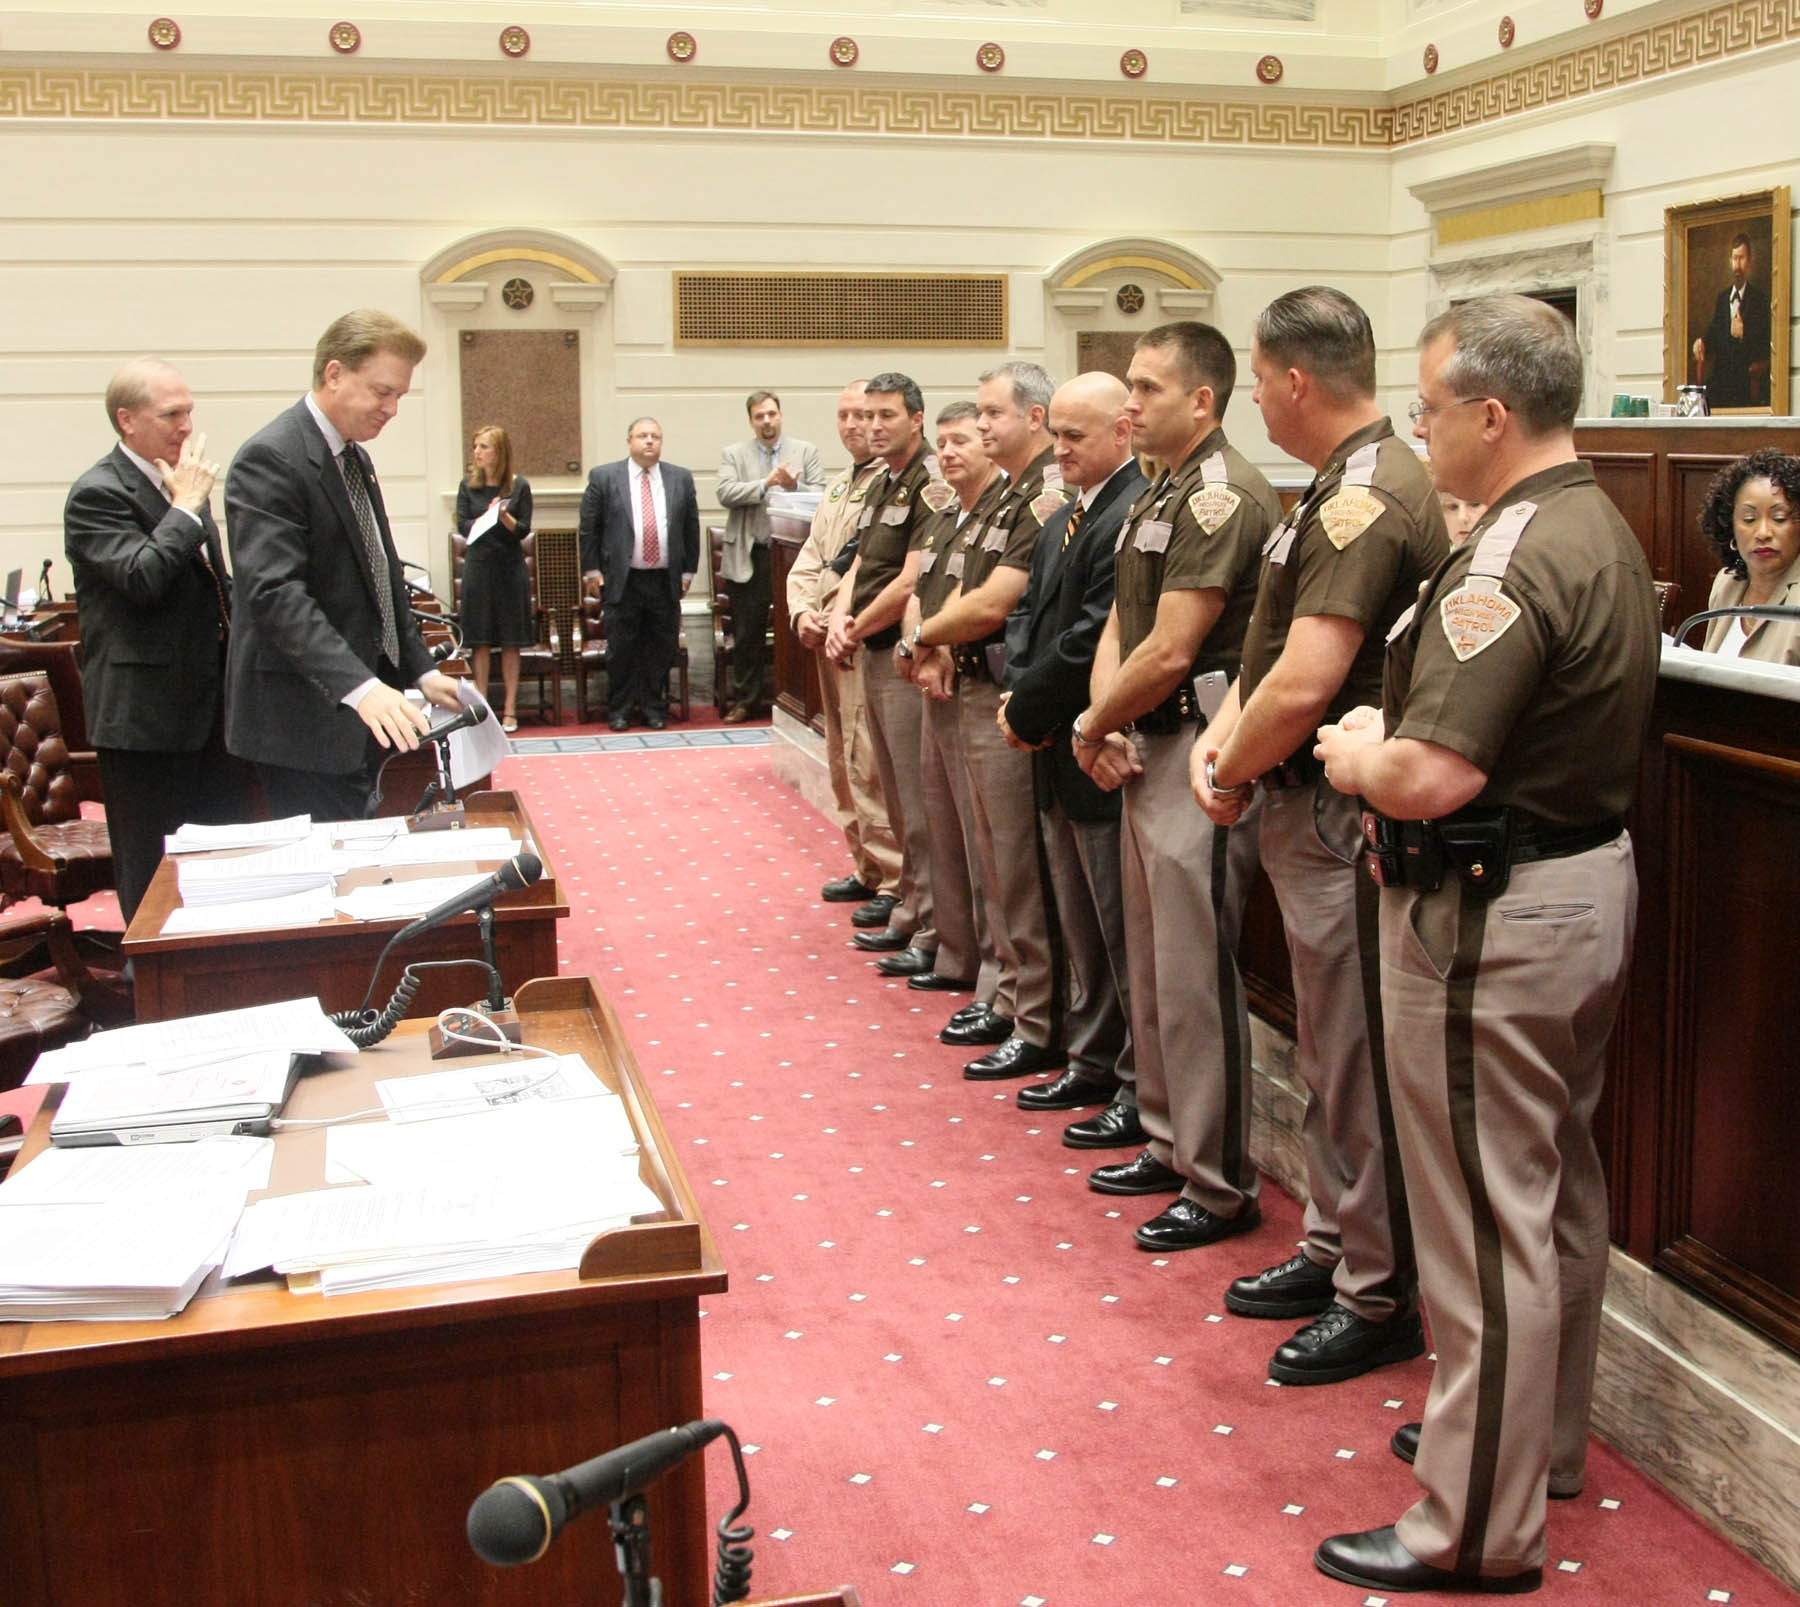 Sen. Laster reaches for the microphone as the Senate honors members of the Highway Patrol.